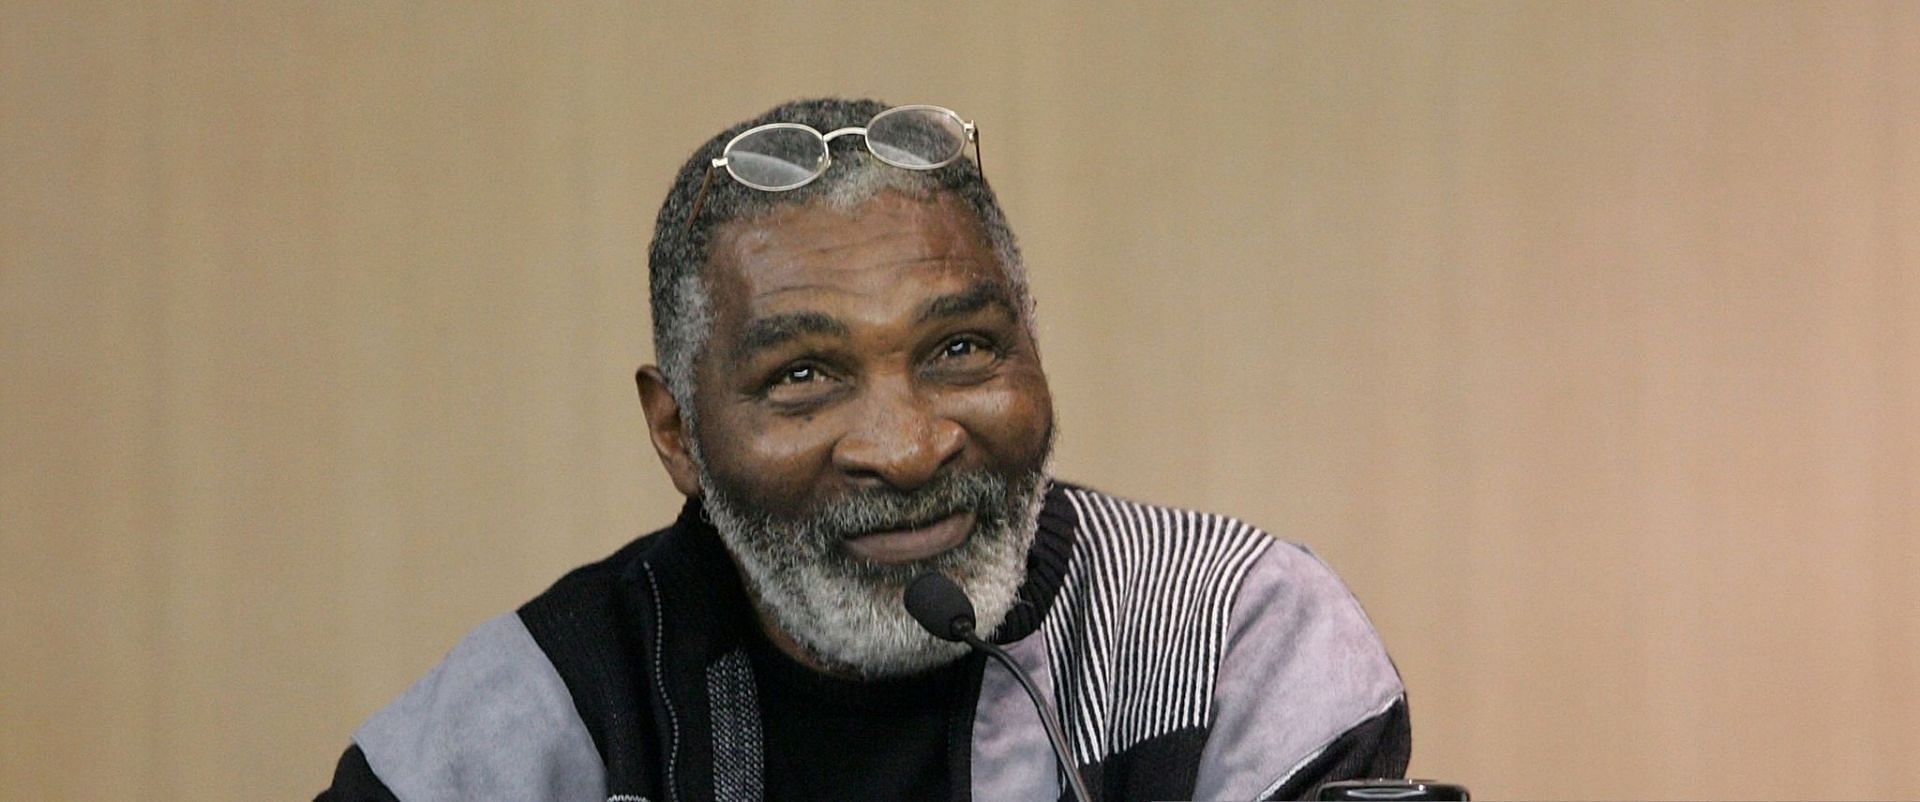 Richard Williams eldest daughter Sabrina Williams has been estranged from her father since she was eight years old (Image via Getty Images/Gregg Lovett-Pool)